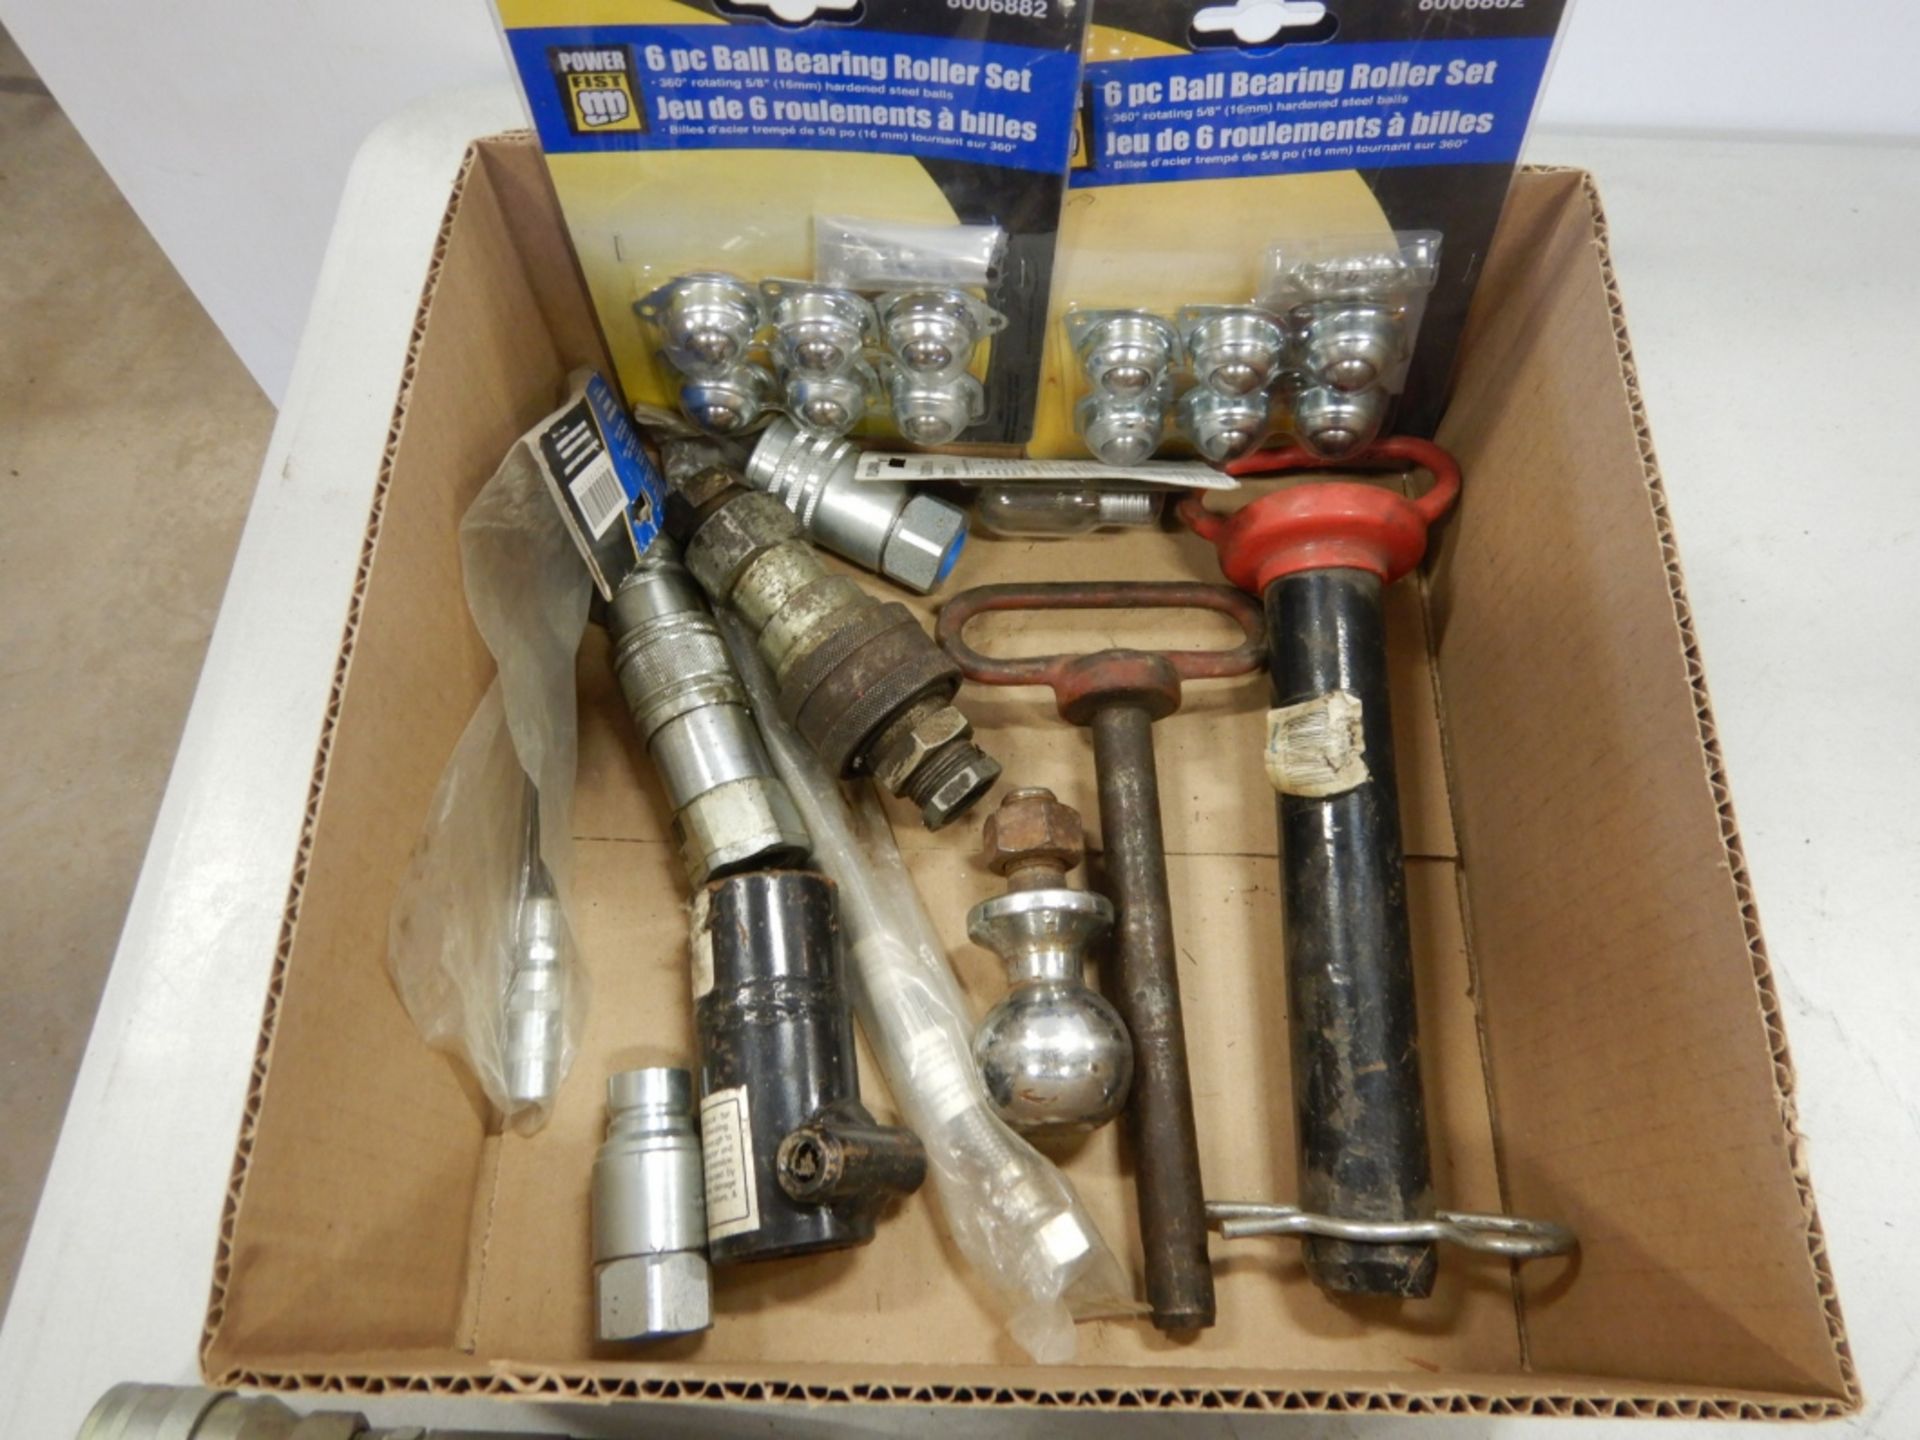 L/O BALL BEARING ROLLER SETS, HYD. HOSES, HITCH PINS, HYD. COUPLERS, GEAR PULLER, ETC. - Image 2 of 3